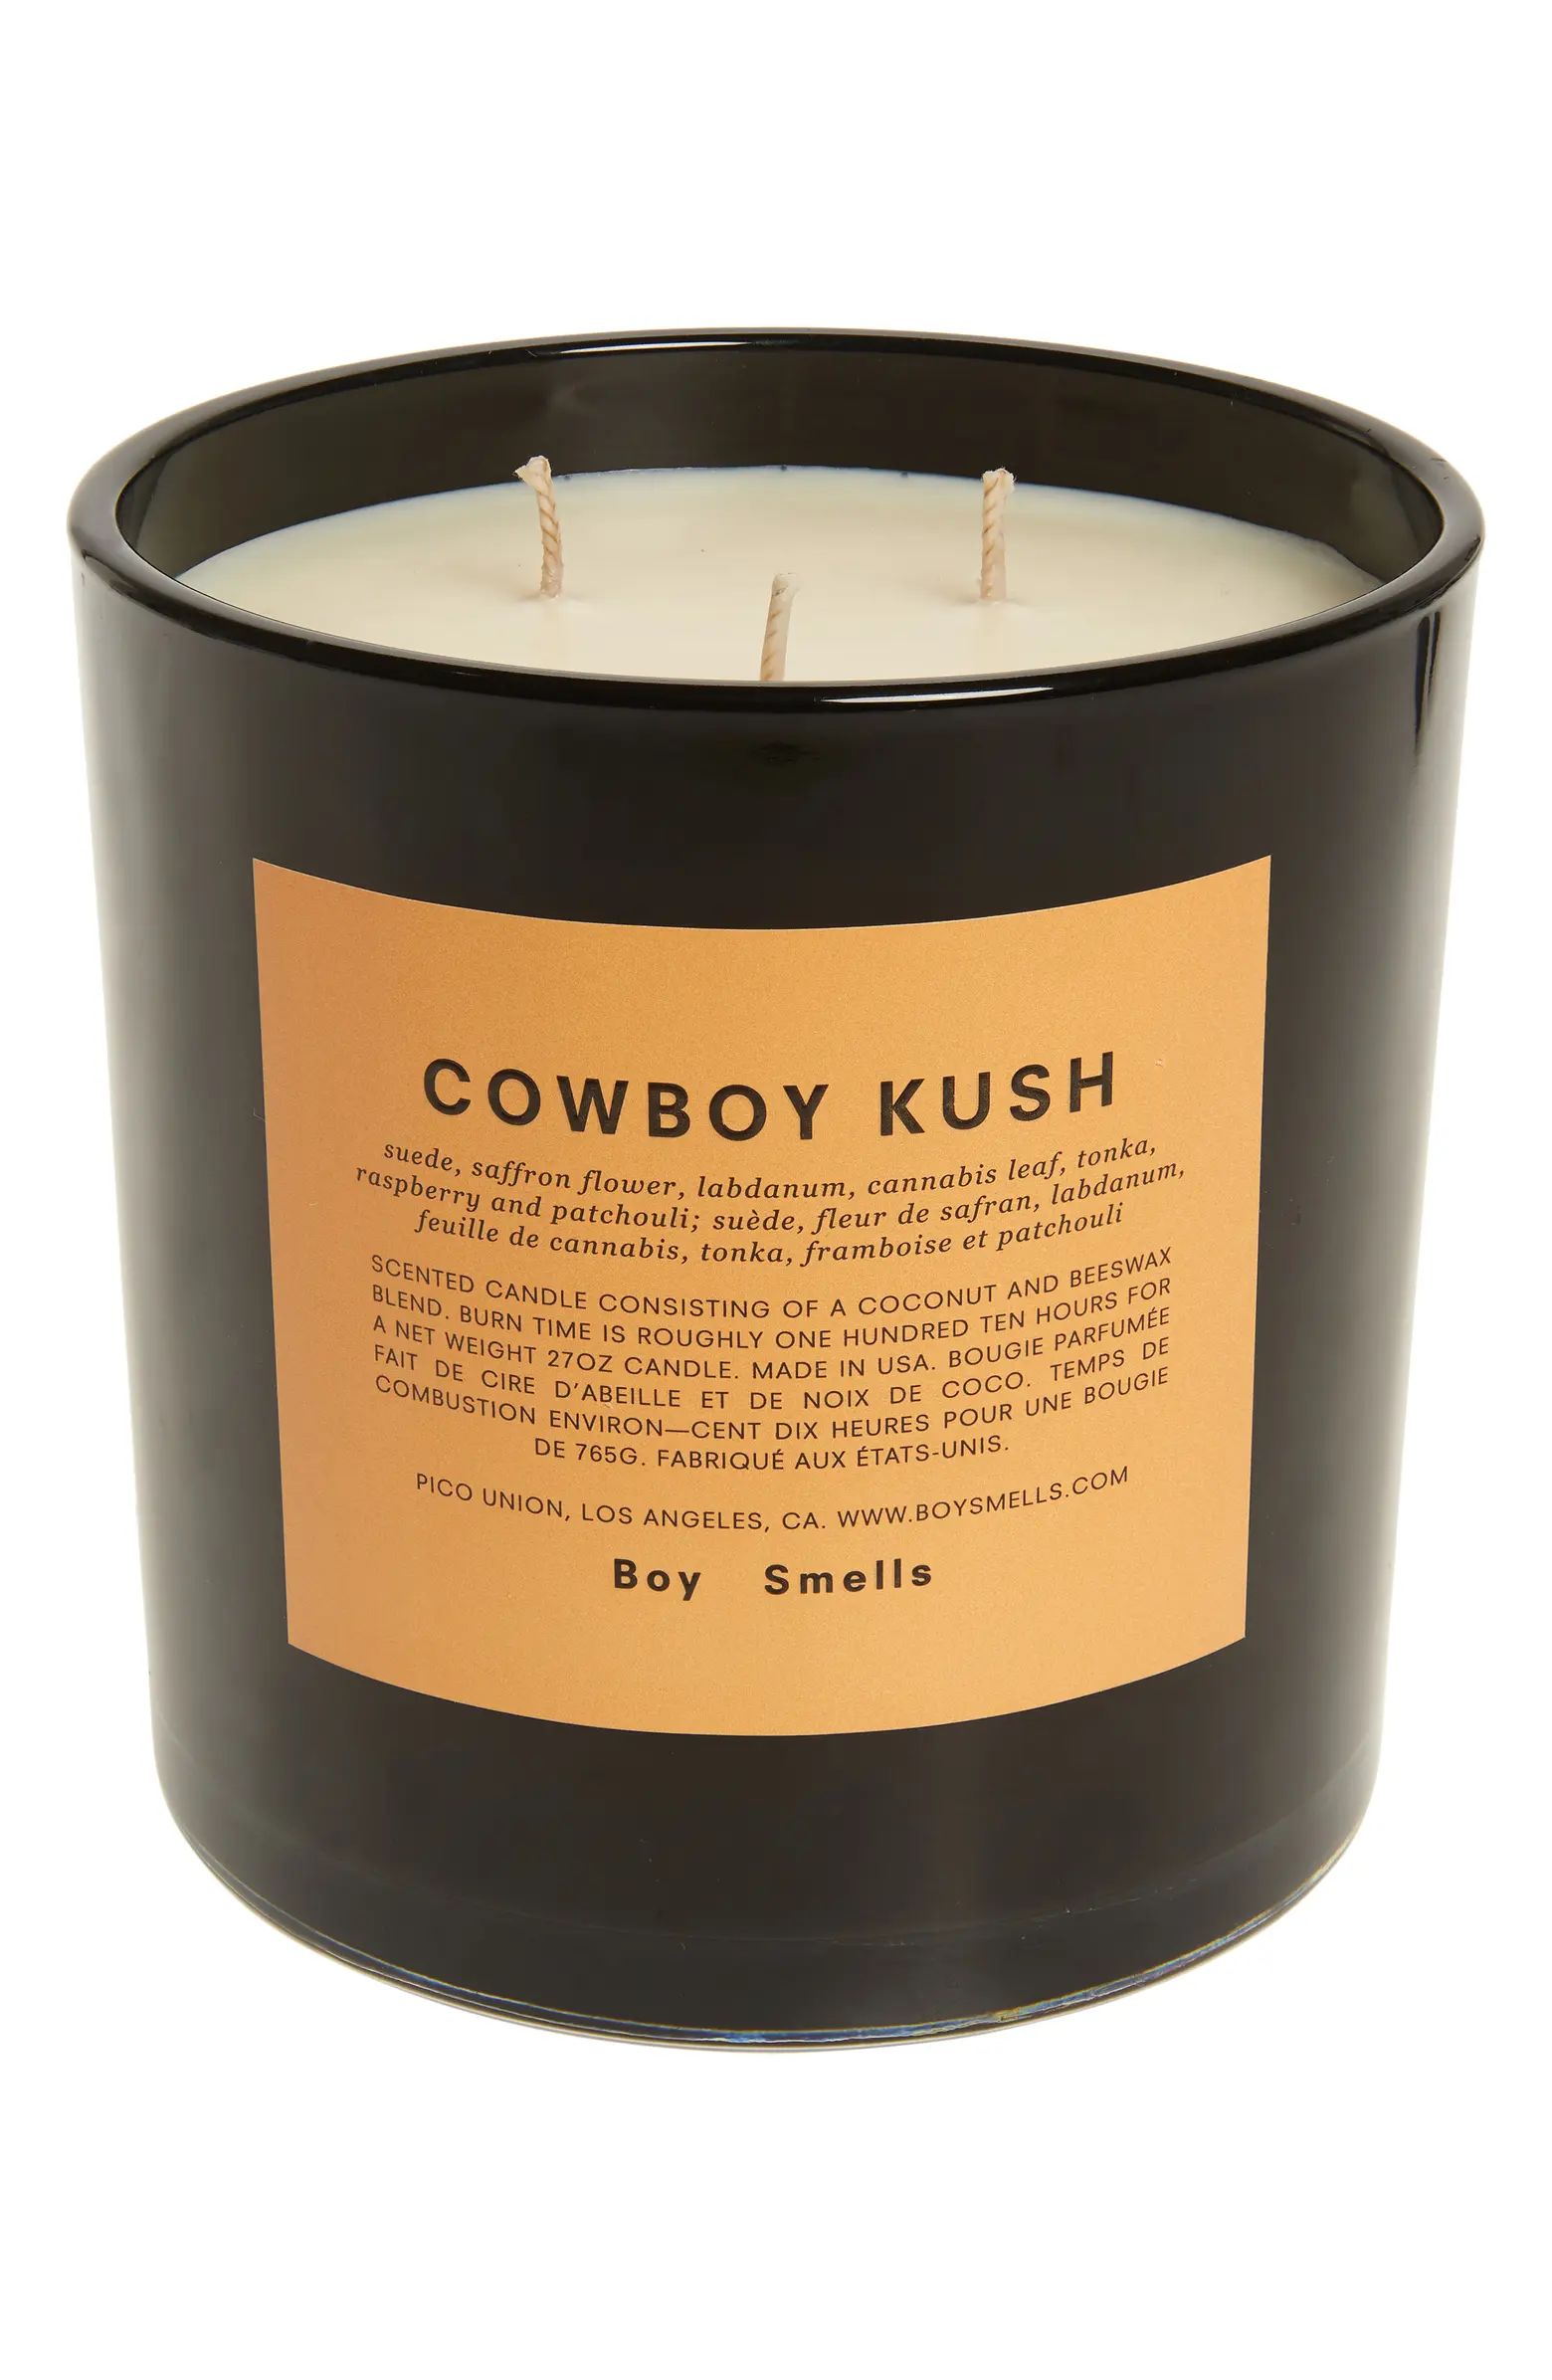 Cowboy Kush Scented Candle | Nordstrom